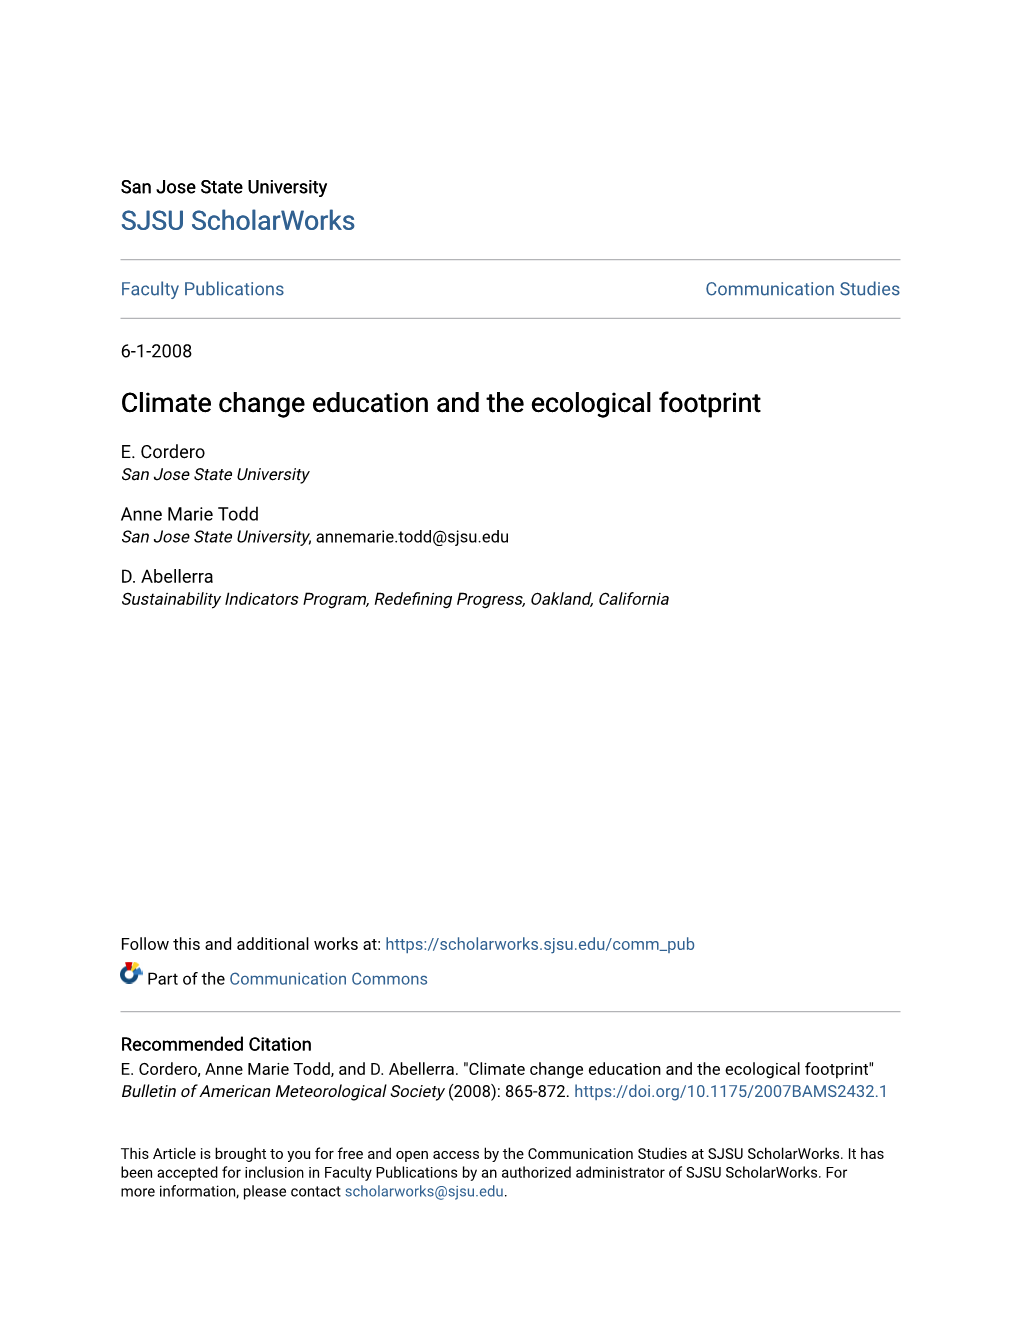 Climate Change Education and the Ecological Footprint